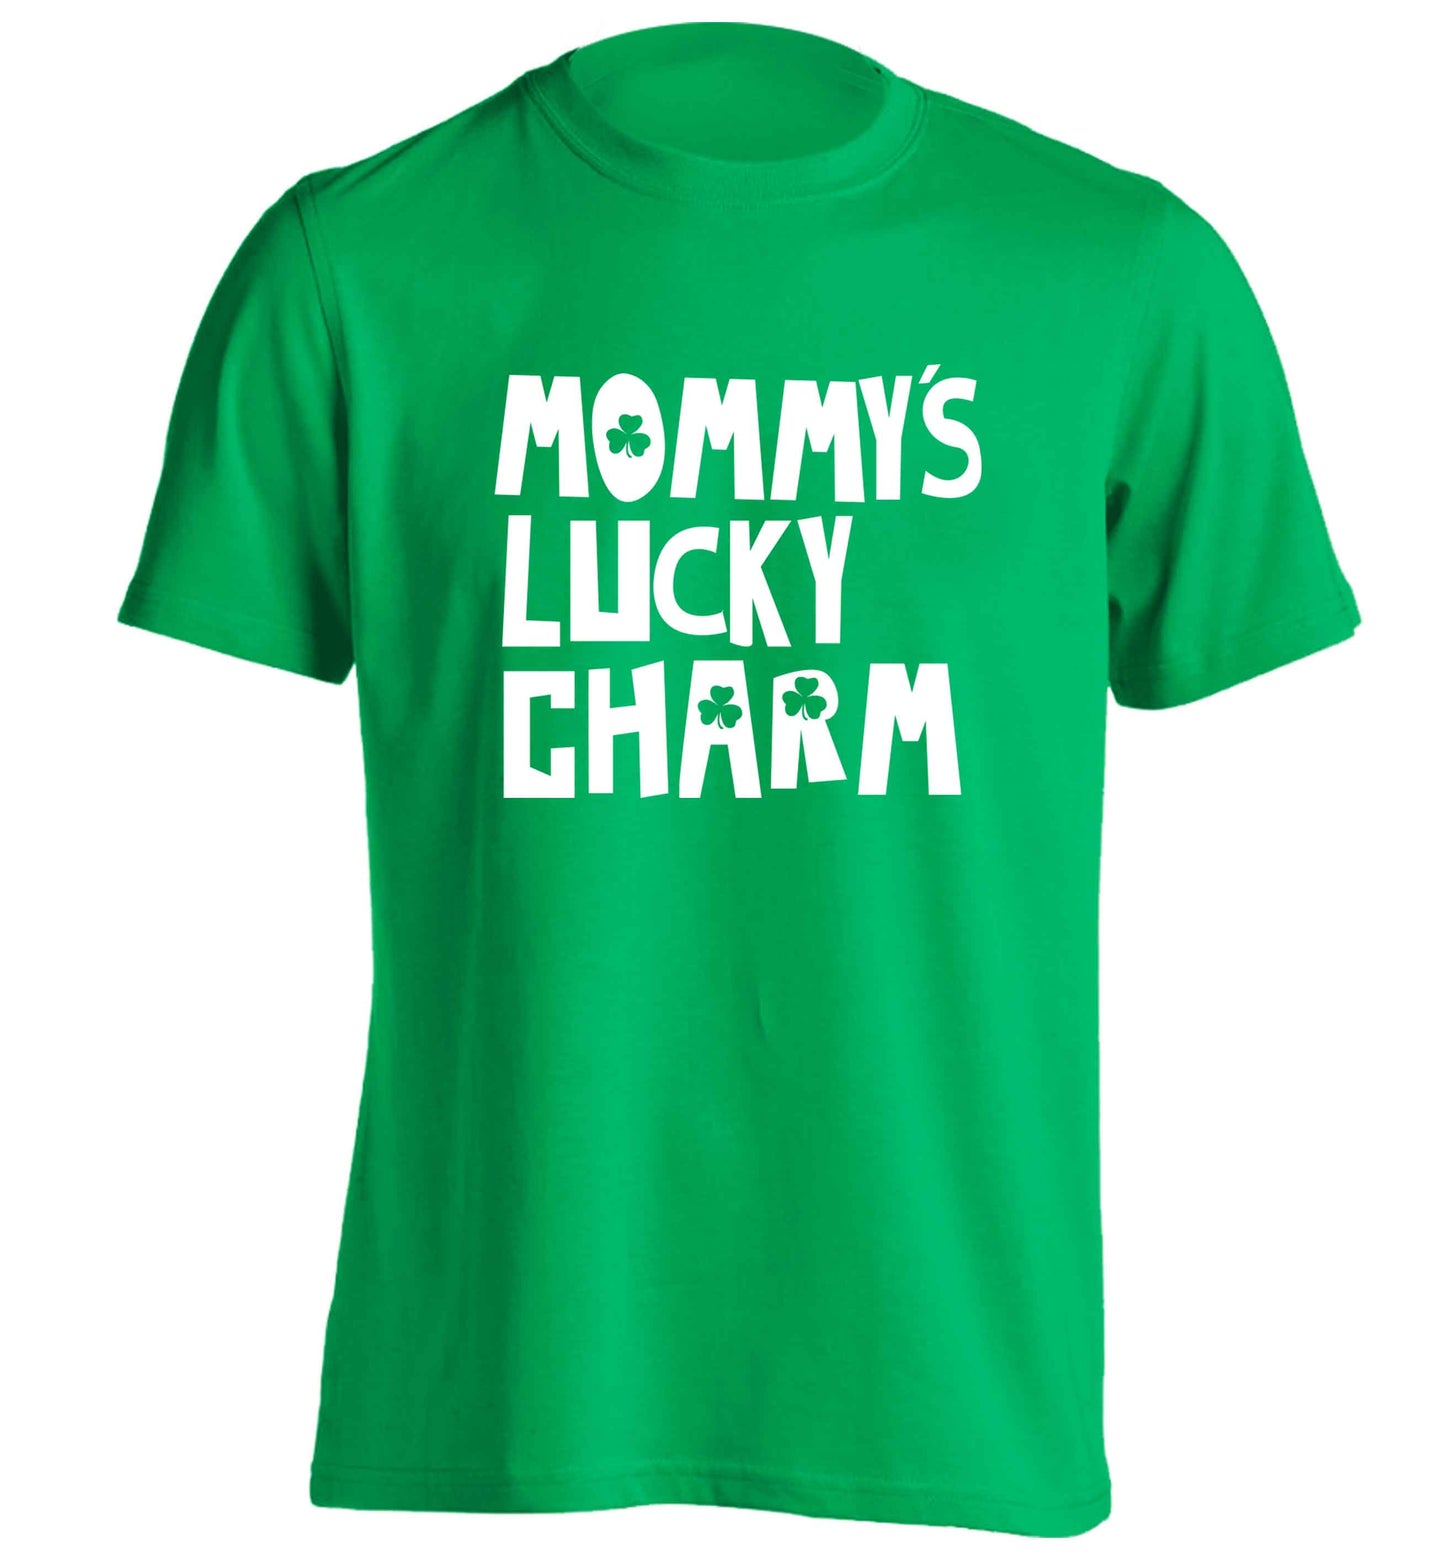 Mommy's lucky charm adults unisex green Tshirt 2XL